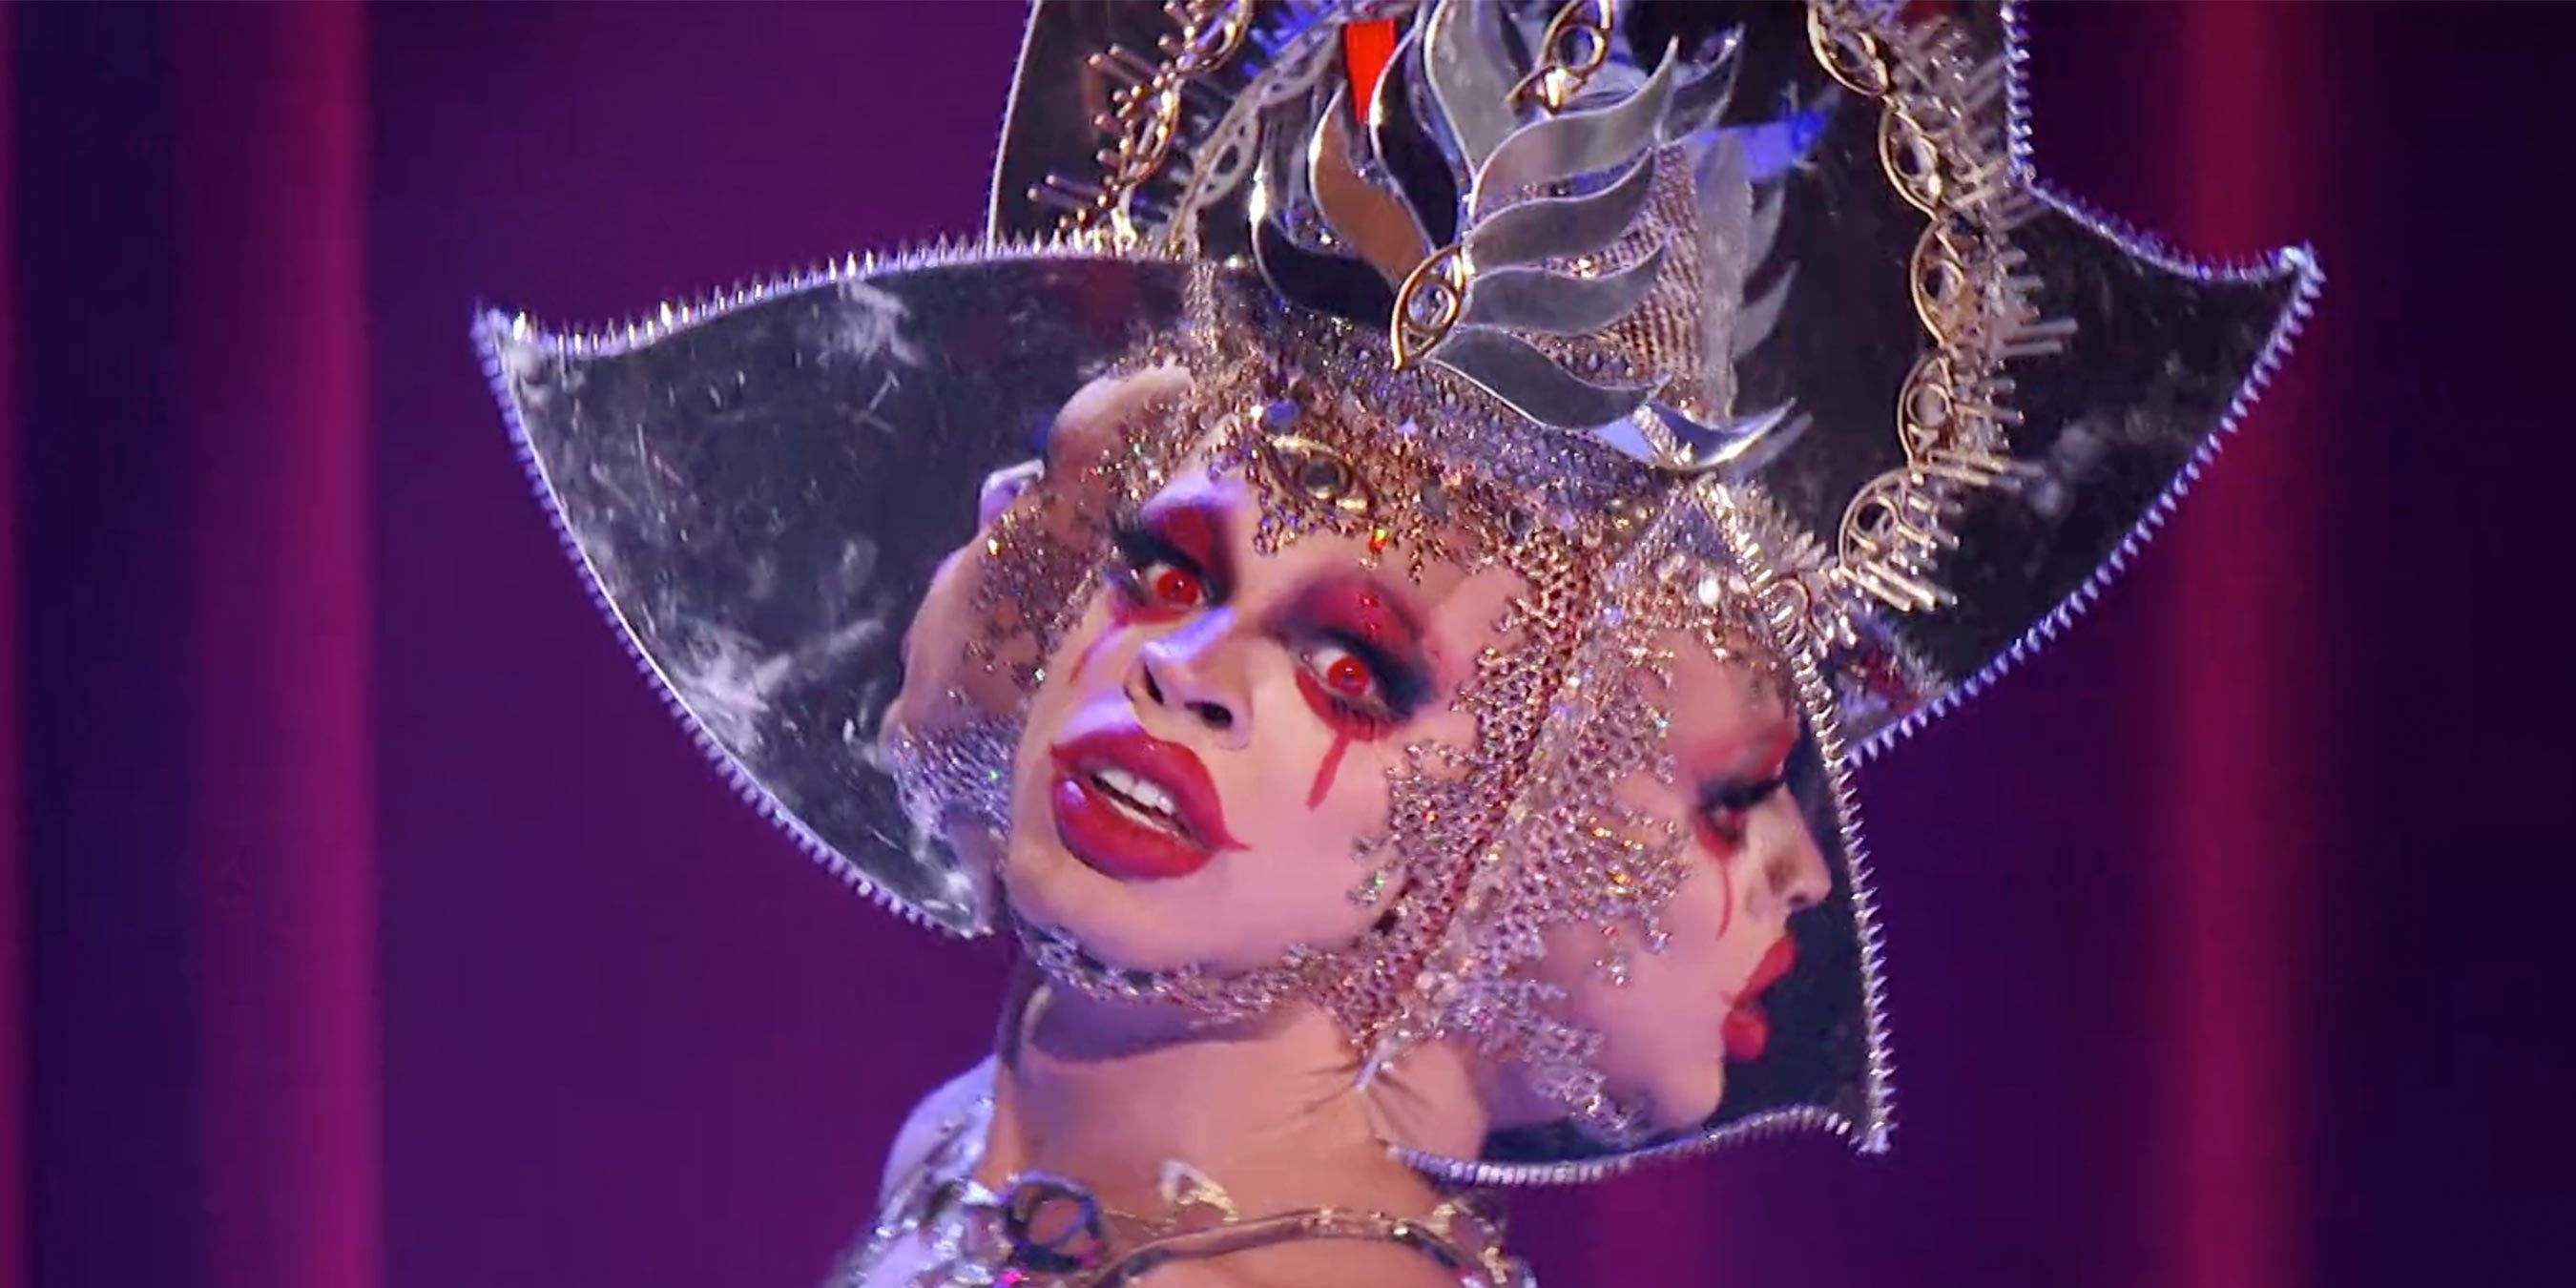 Close-up of Yvie Oddly at the RuPaul's Drag Race season 11 finale